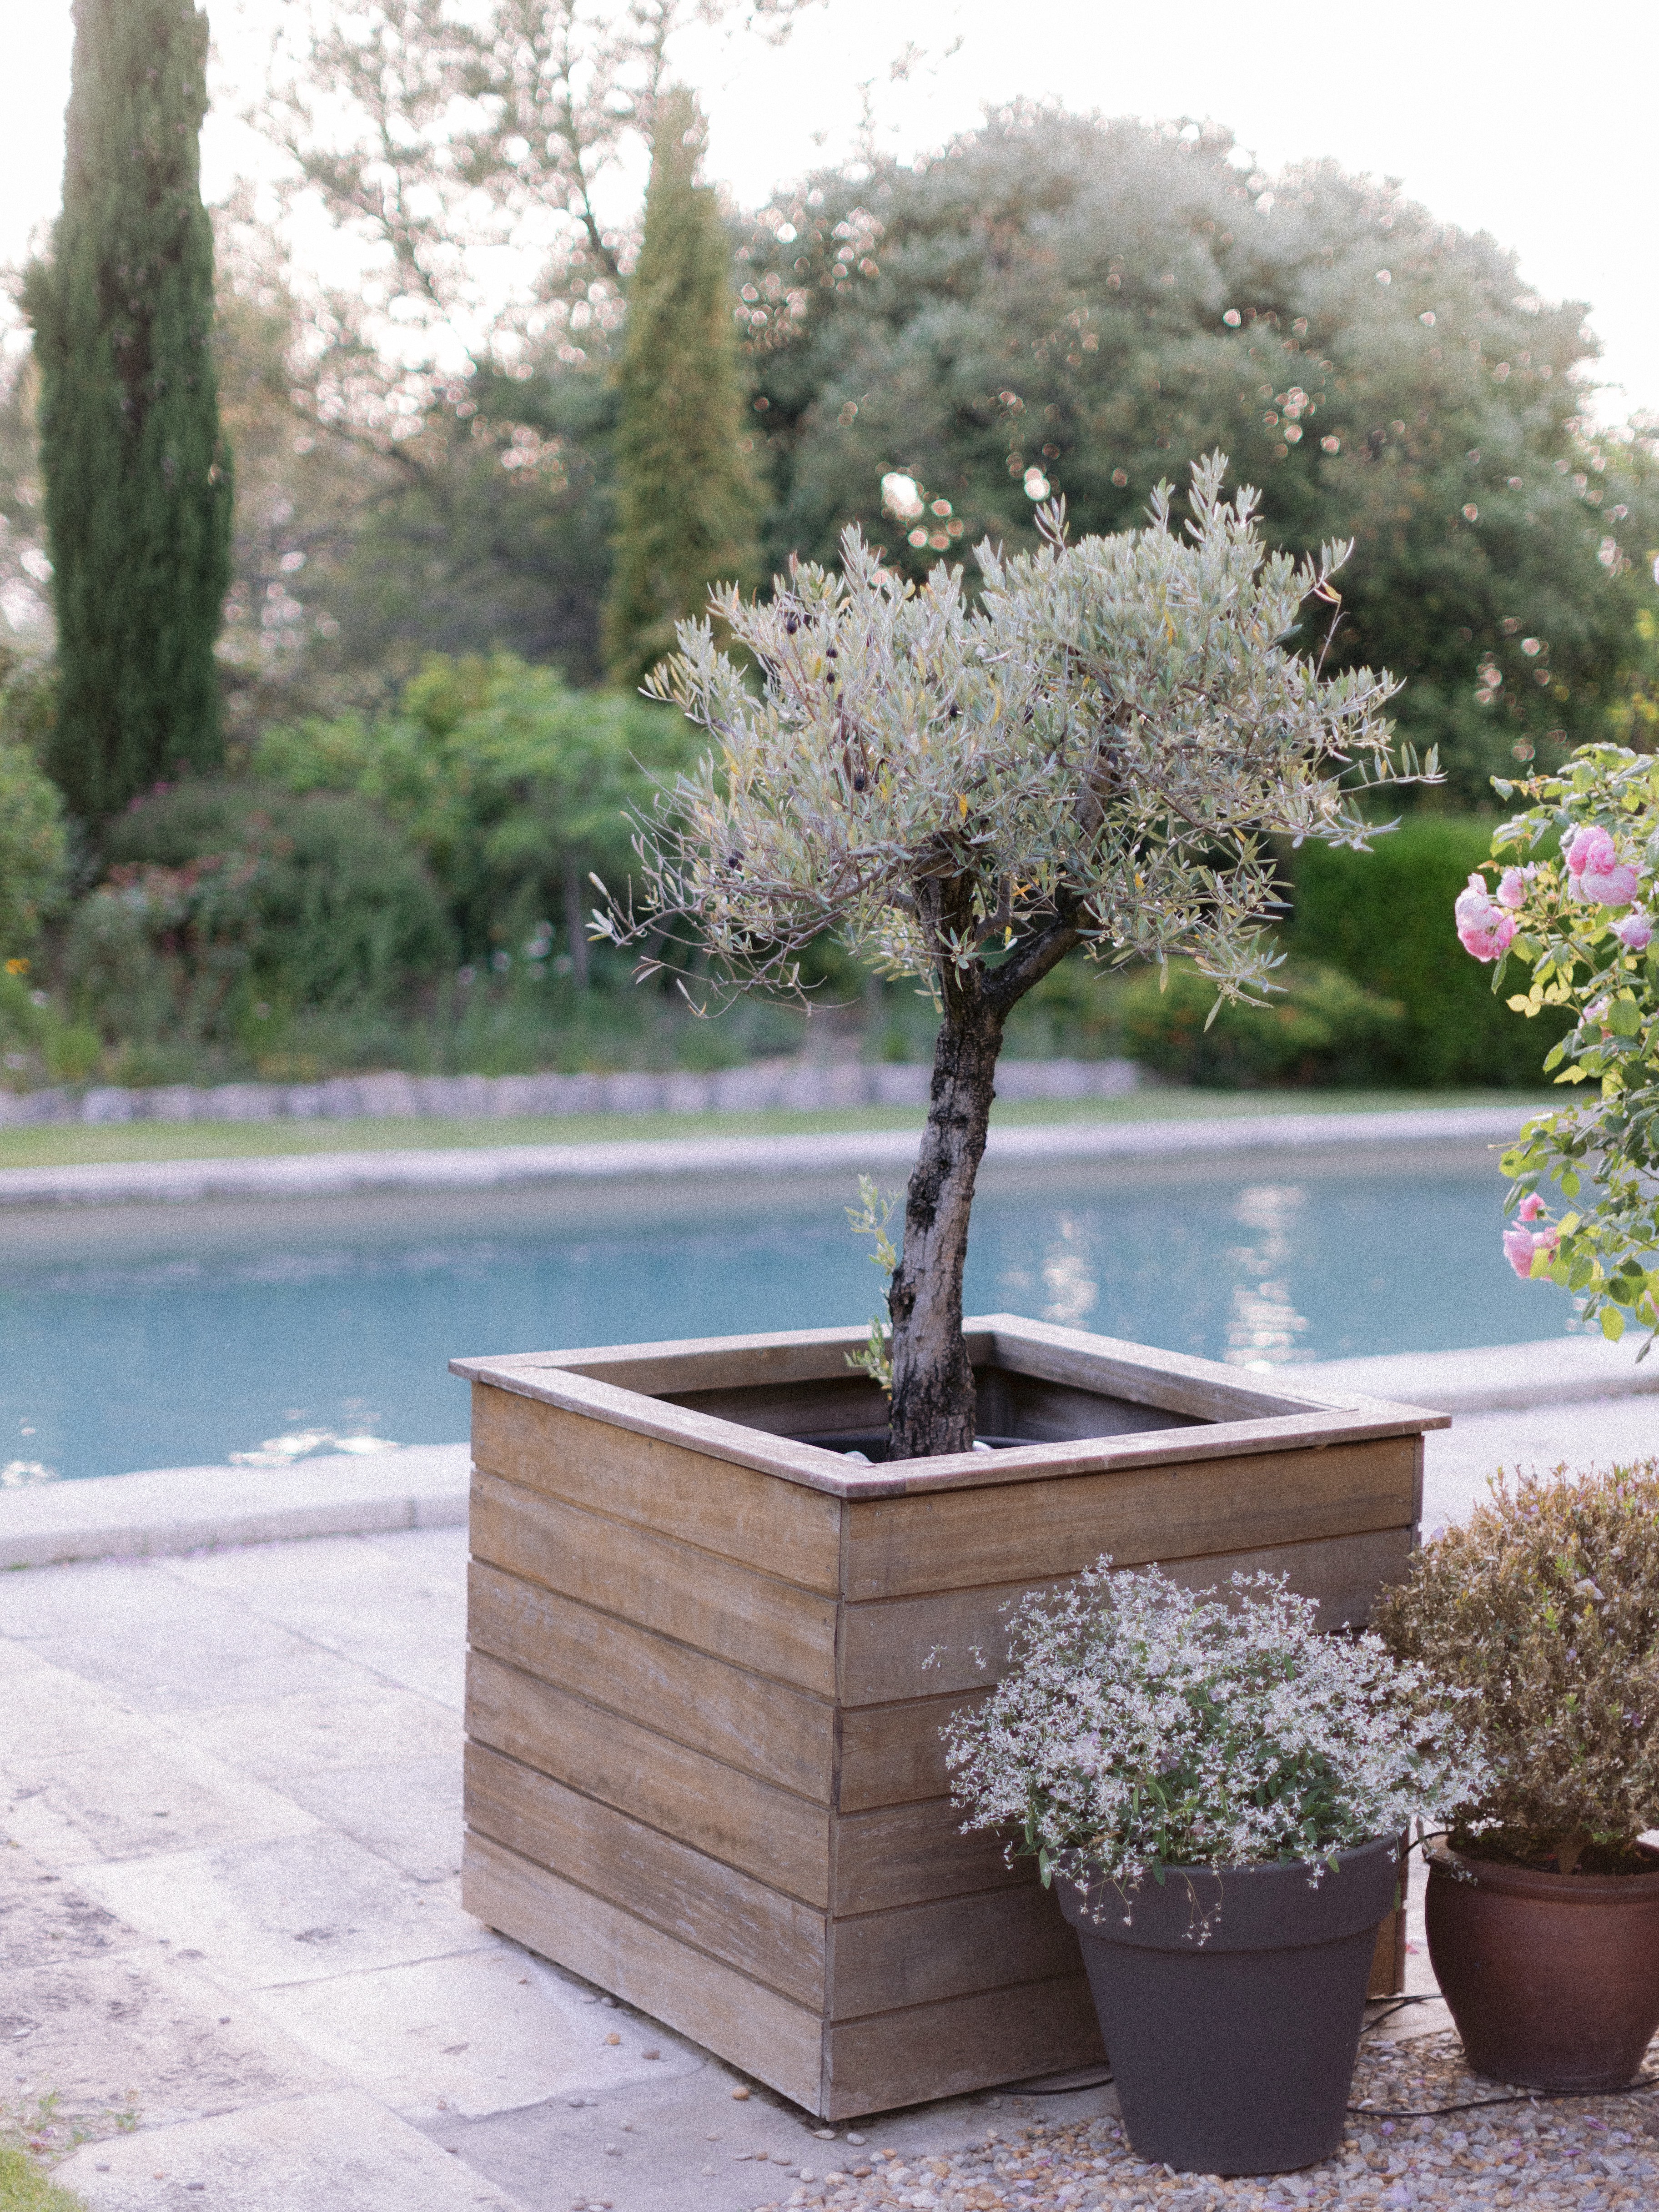 A tree in a large wooden planter next to a swimming pool, flanked by other potted plants, in a serene garden setting during twilight.